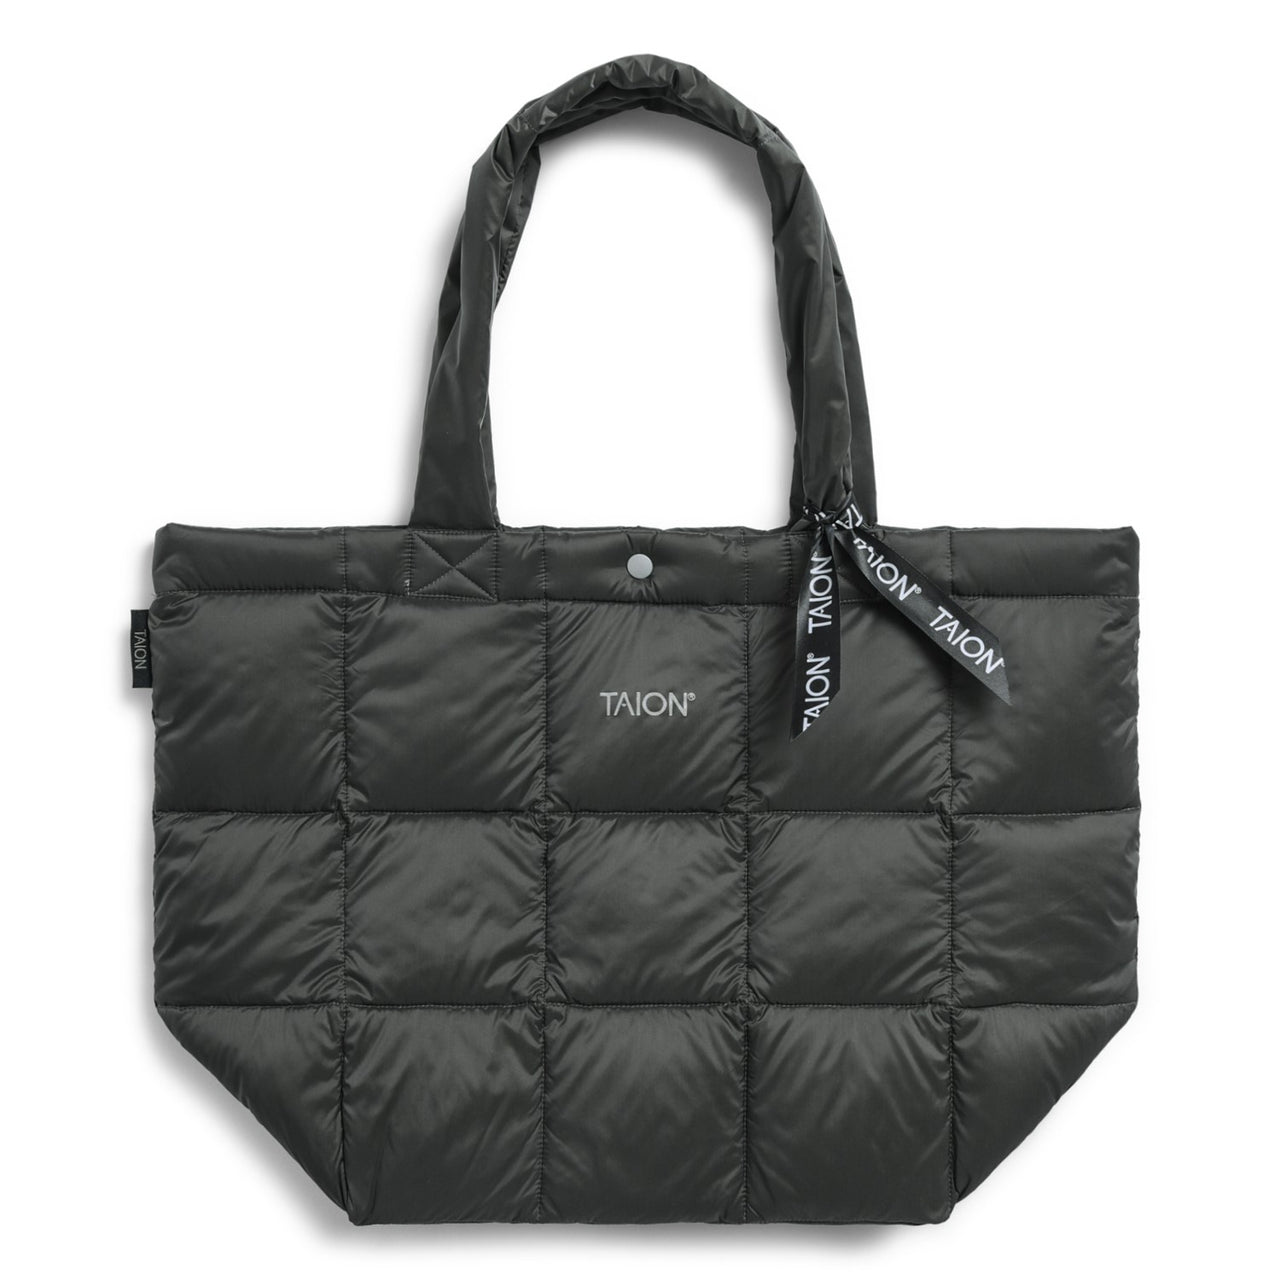 Drake General Store - TAION Lunch Down Tote Bag - Dark Charcoal